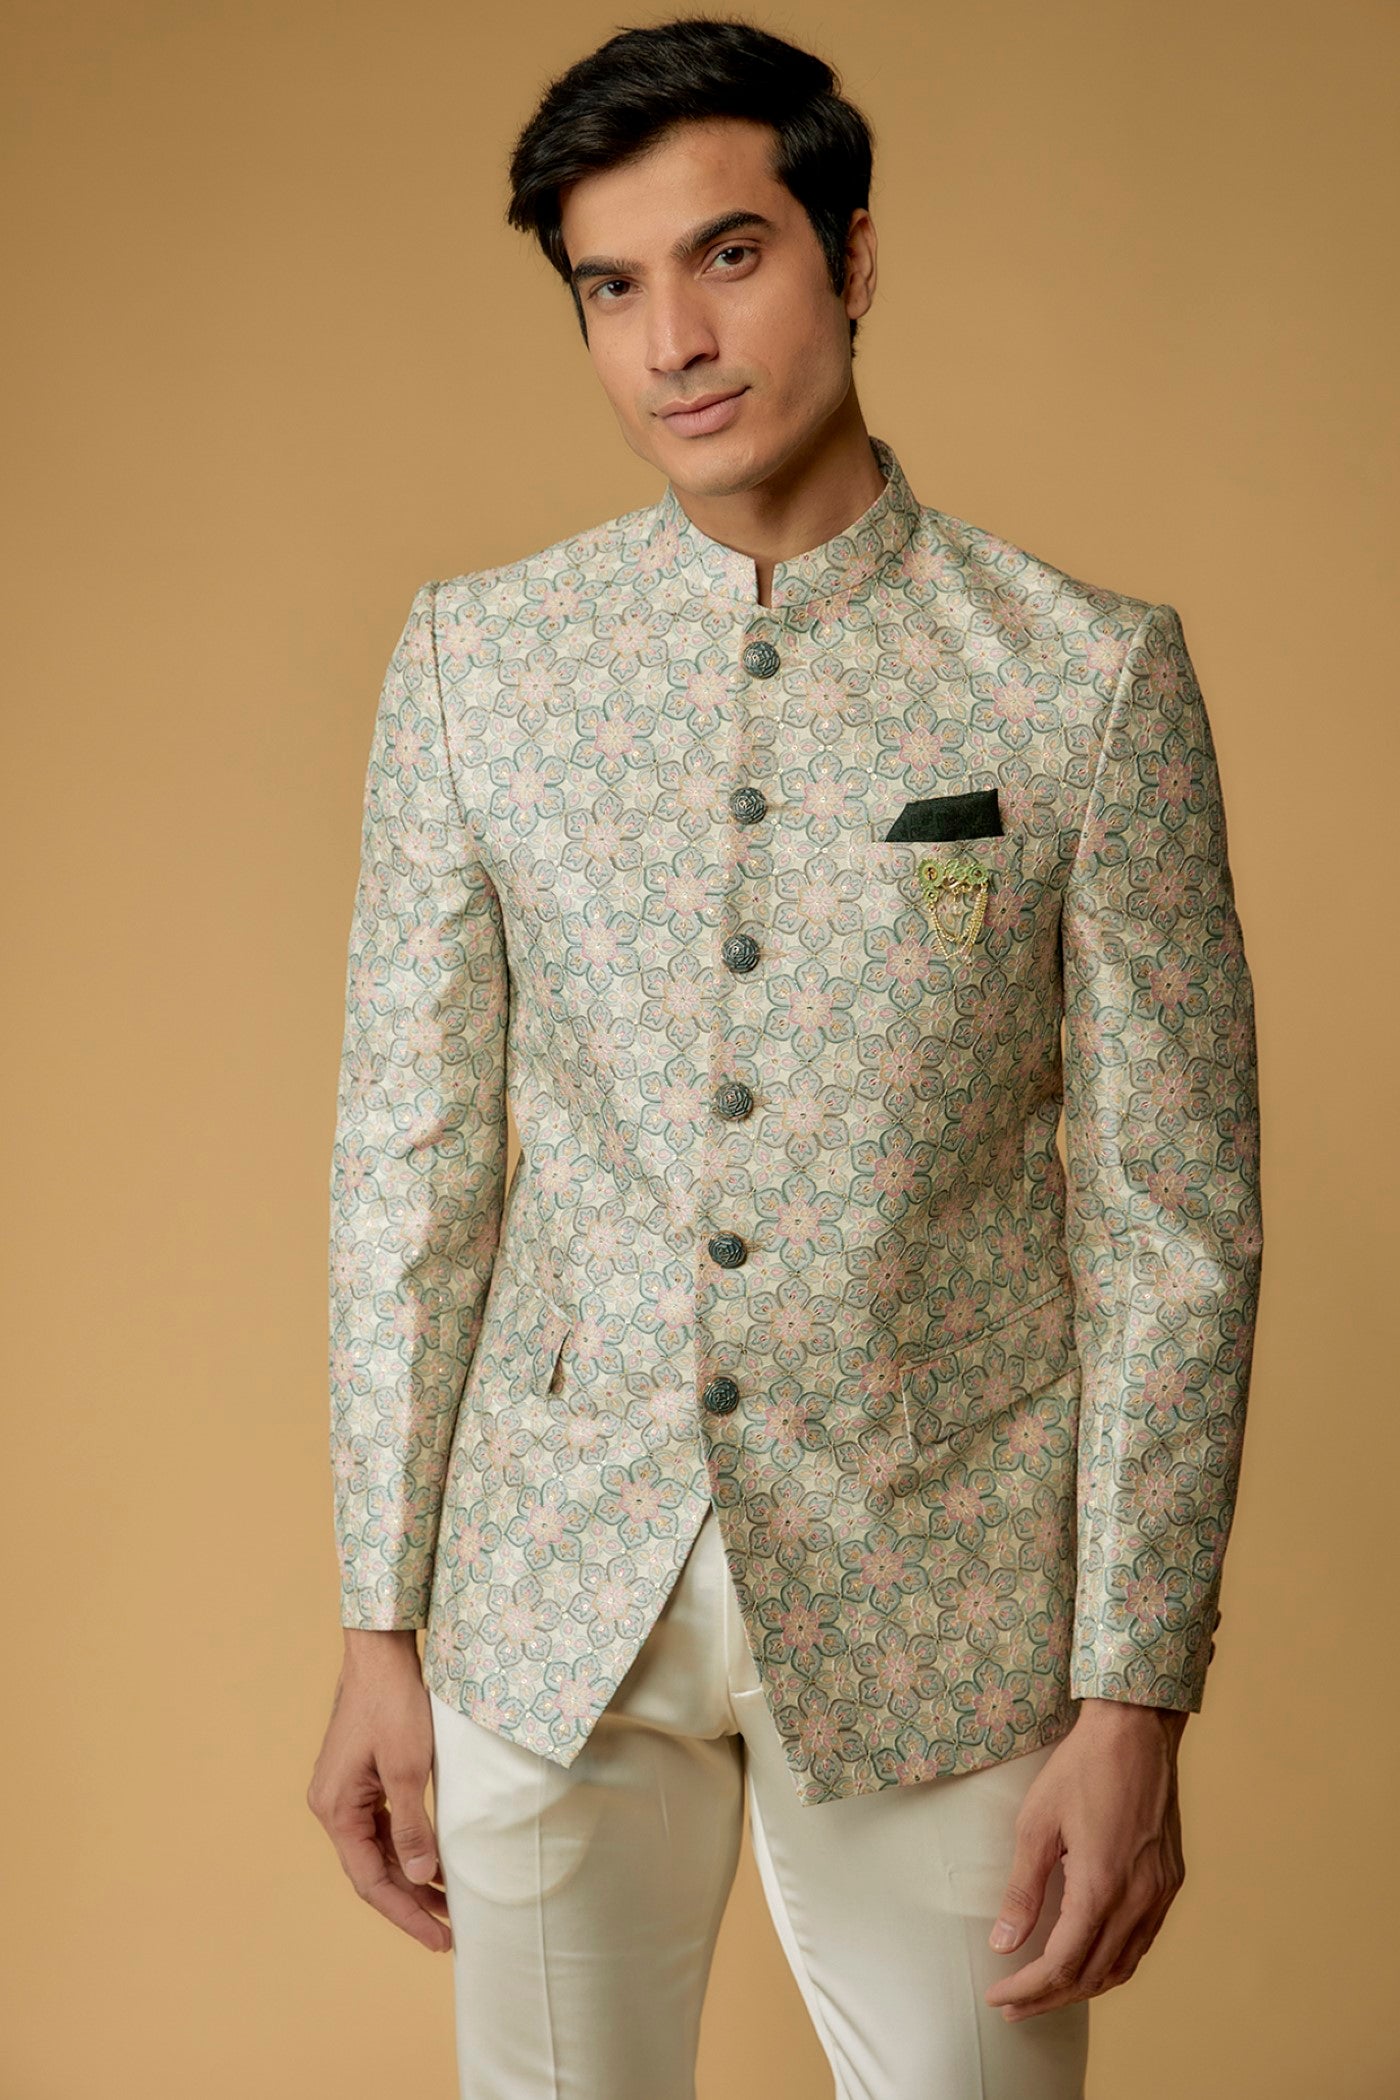 Men's Outfit Ideas –5 Ways To Style Your Indo-Western Outfits | Wedding  dresses men indian, Wedding outfit men, Groom dress men